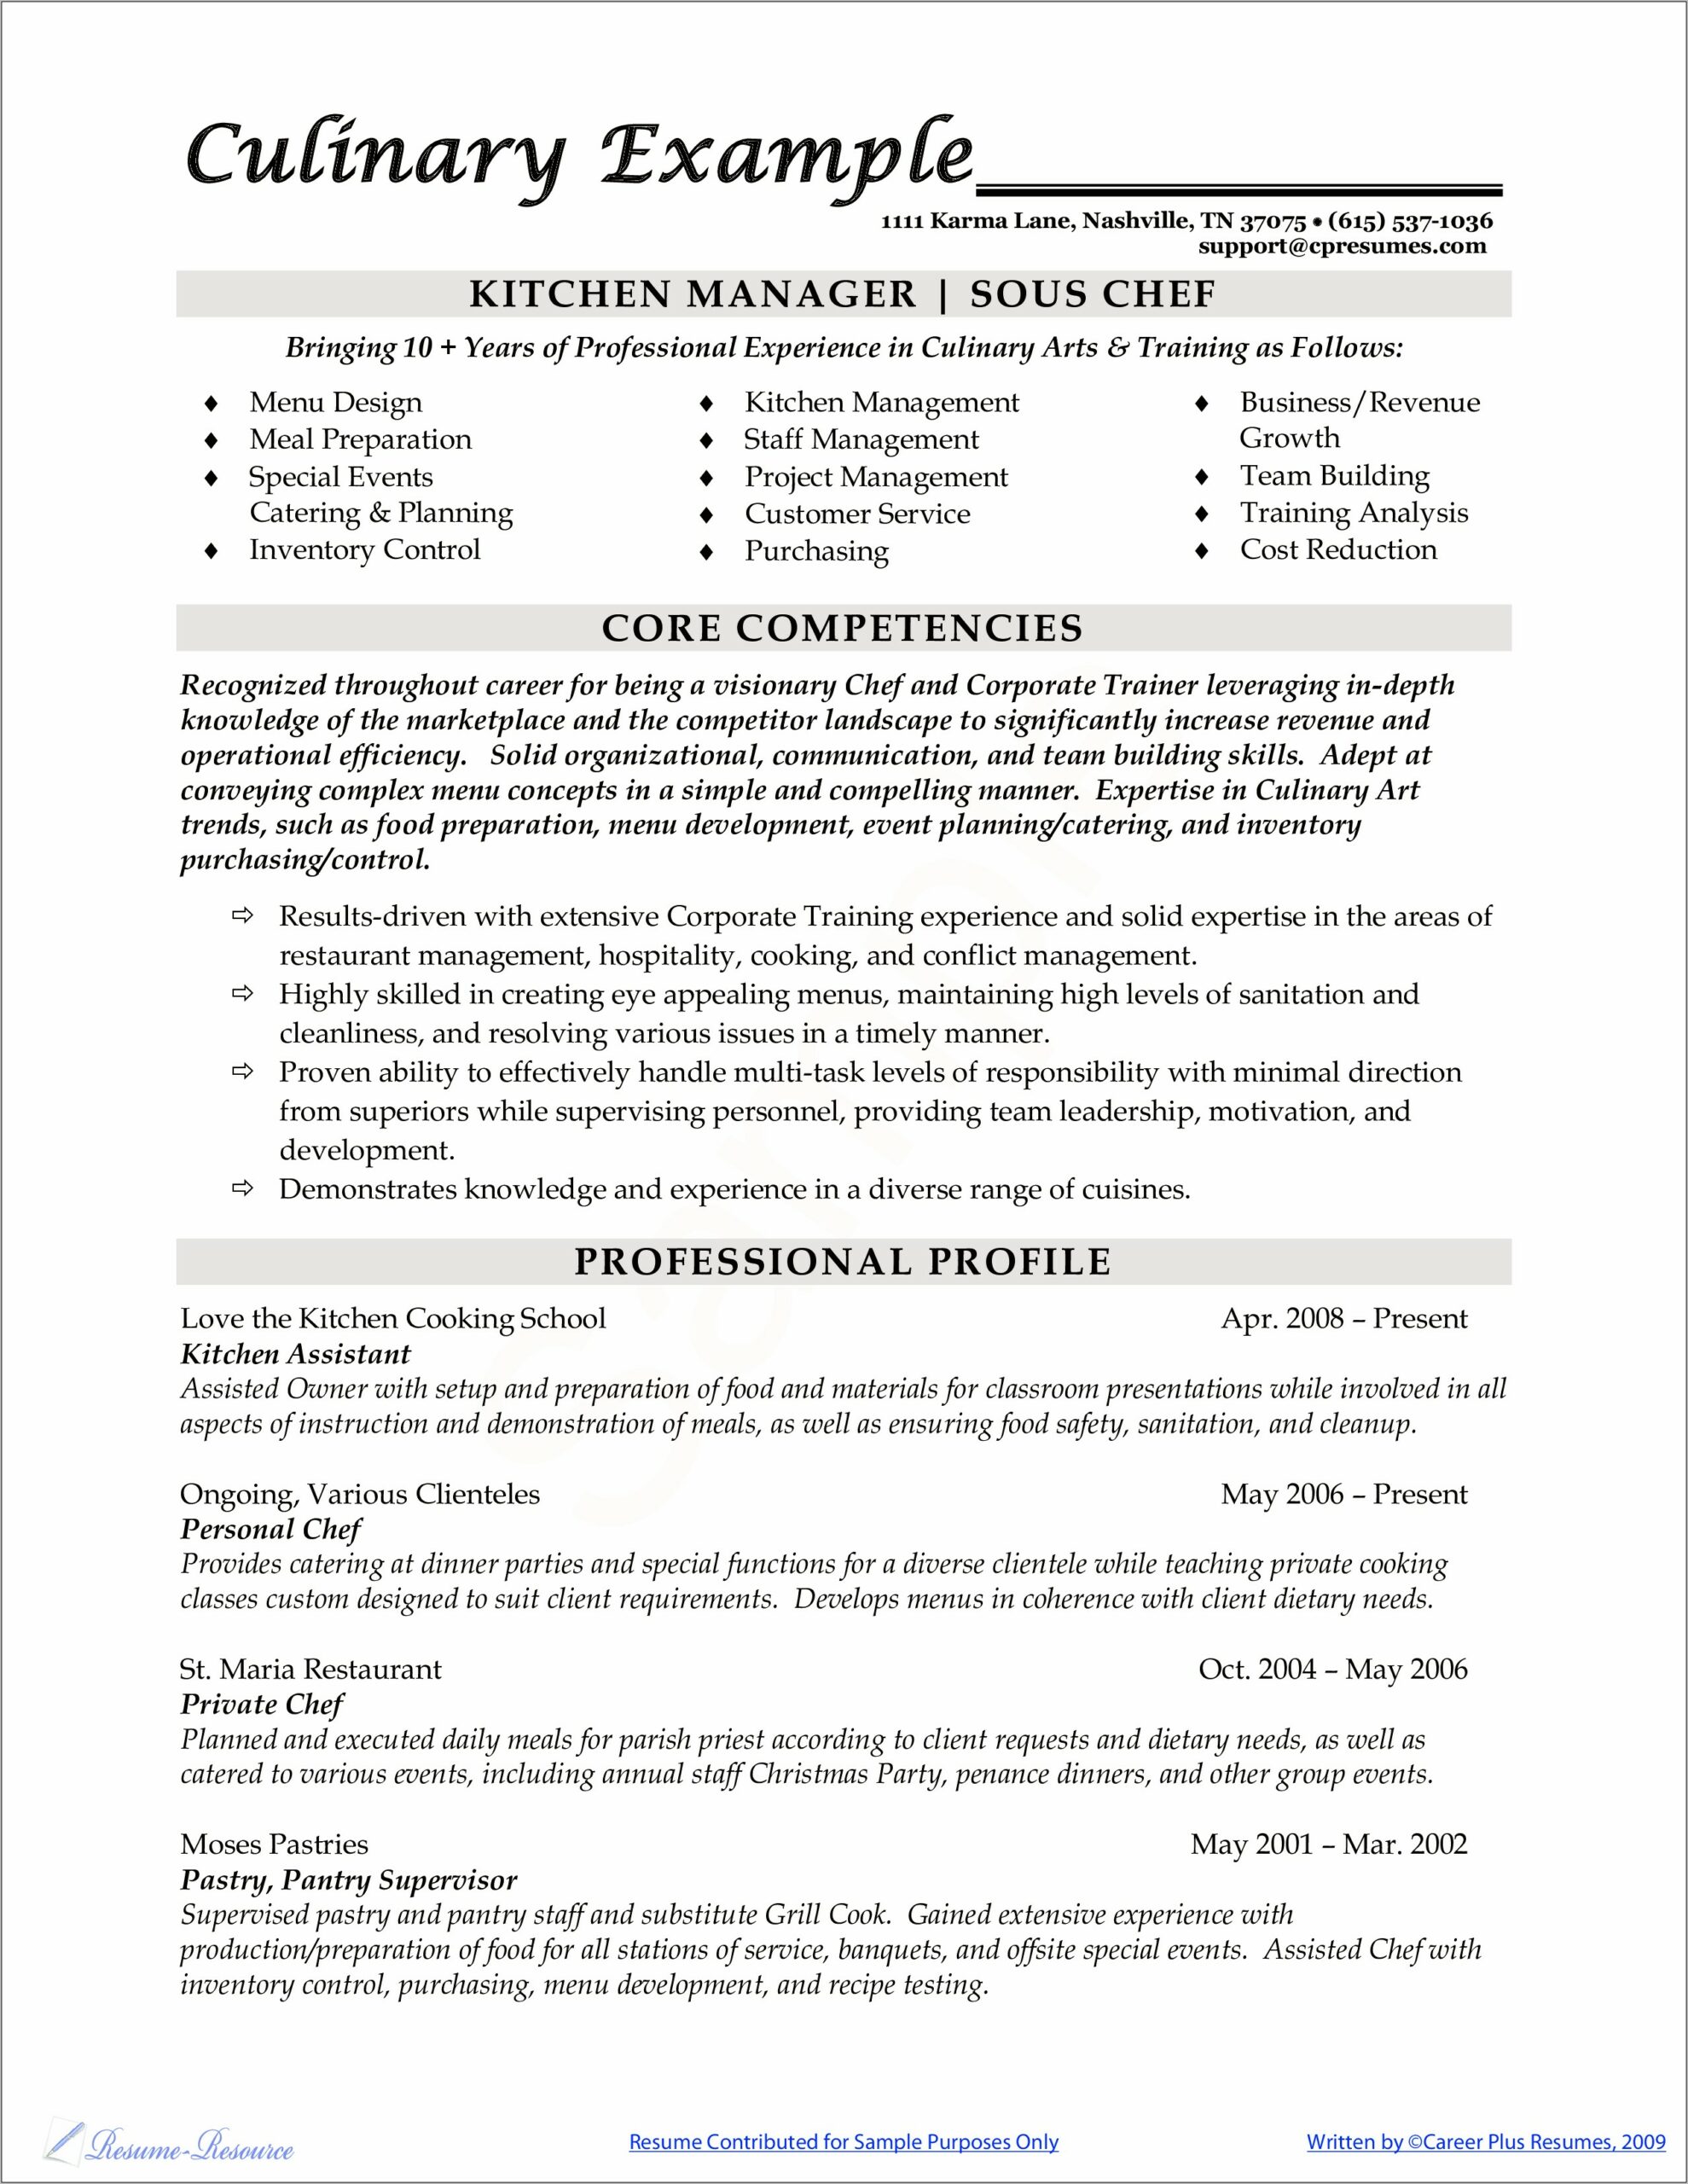 Sample Resume For Pastry Assistant